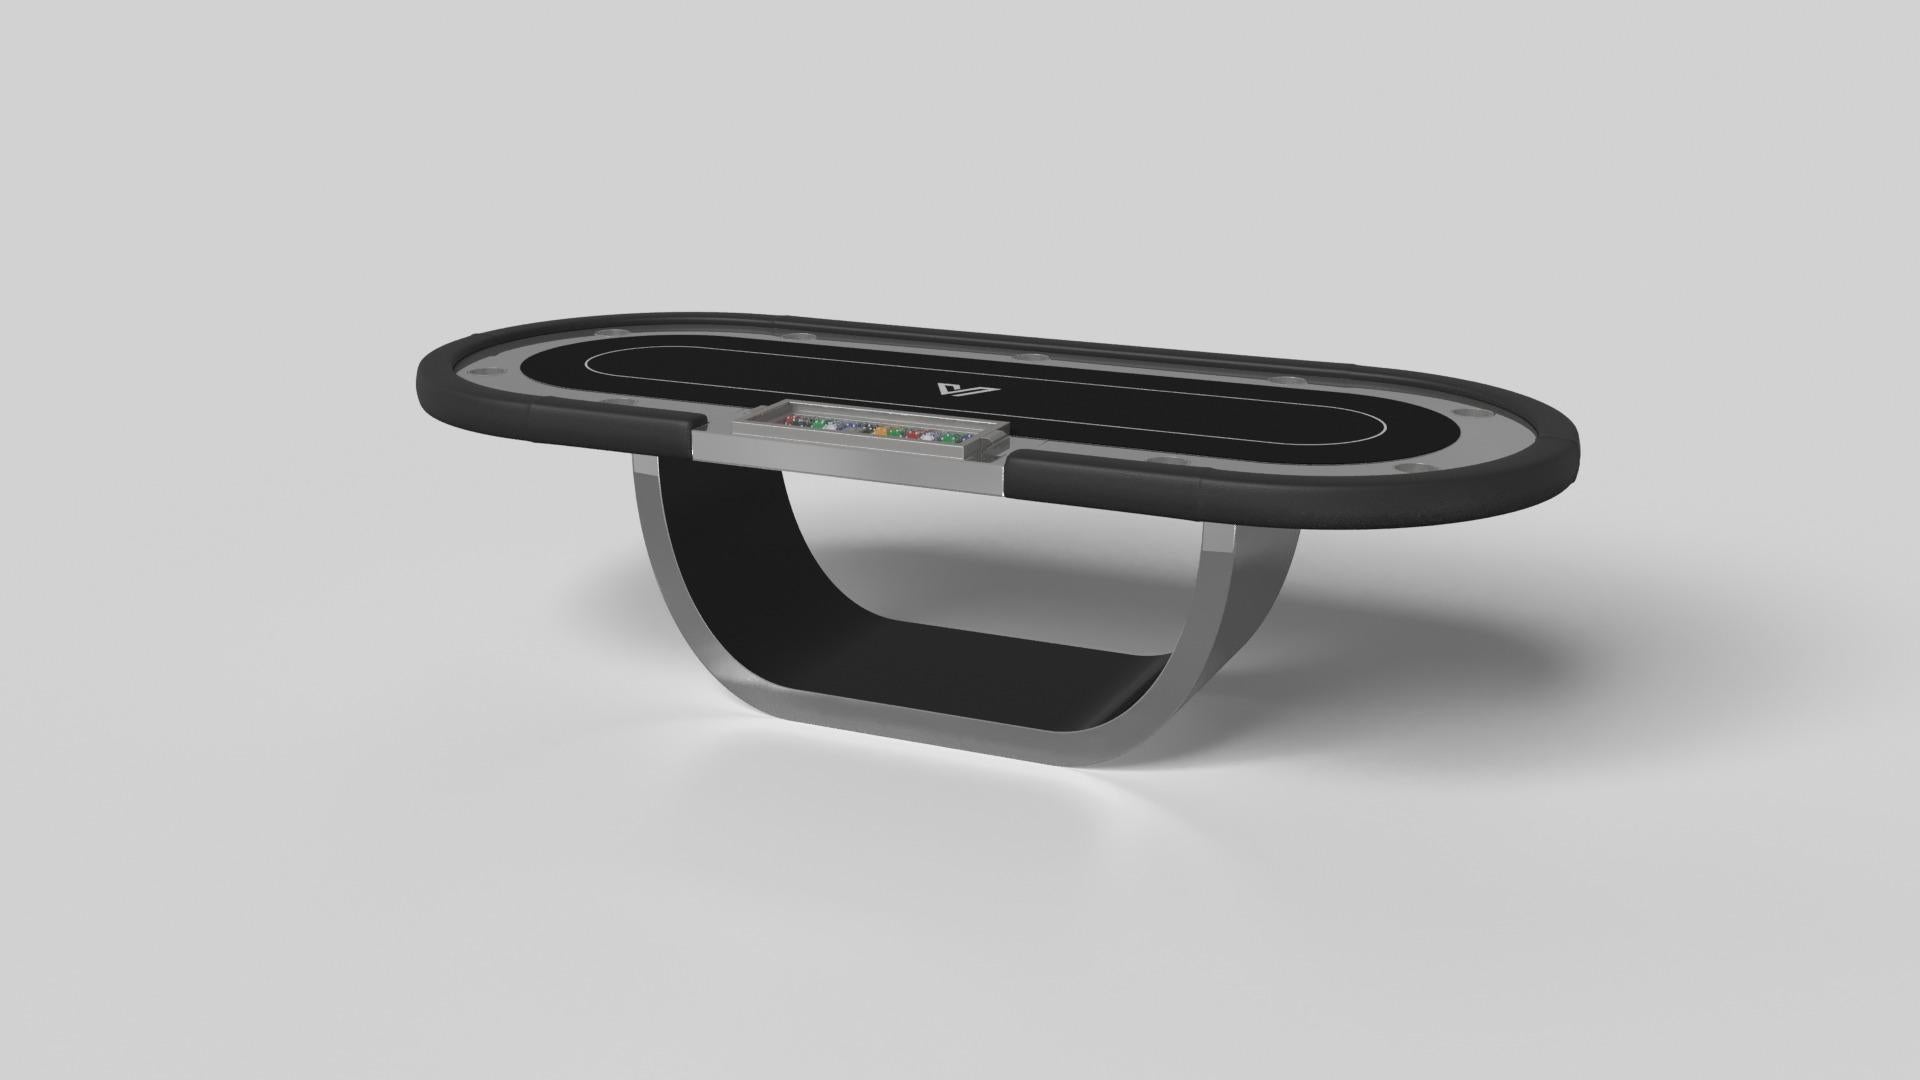 Handcrafted with intricate accents and a precision-carved curved base, the Sid poker table in black encompasses a series of smooth edges, distinctive details, and unconventional elements in one unique expression of luxury design. Built by hand from